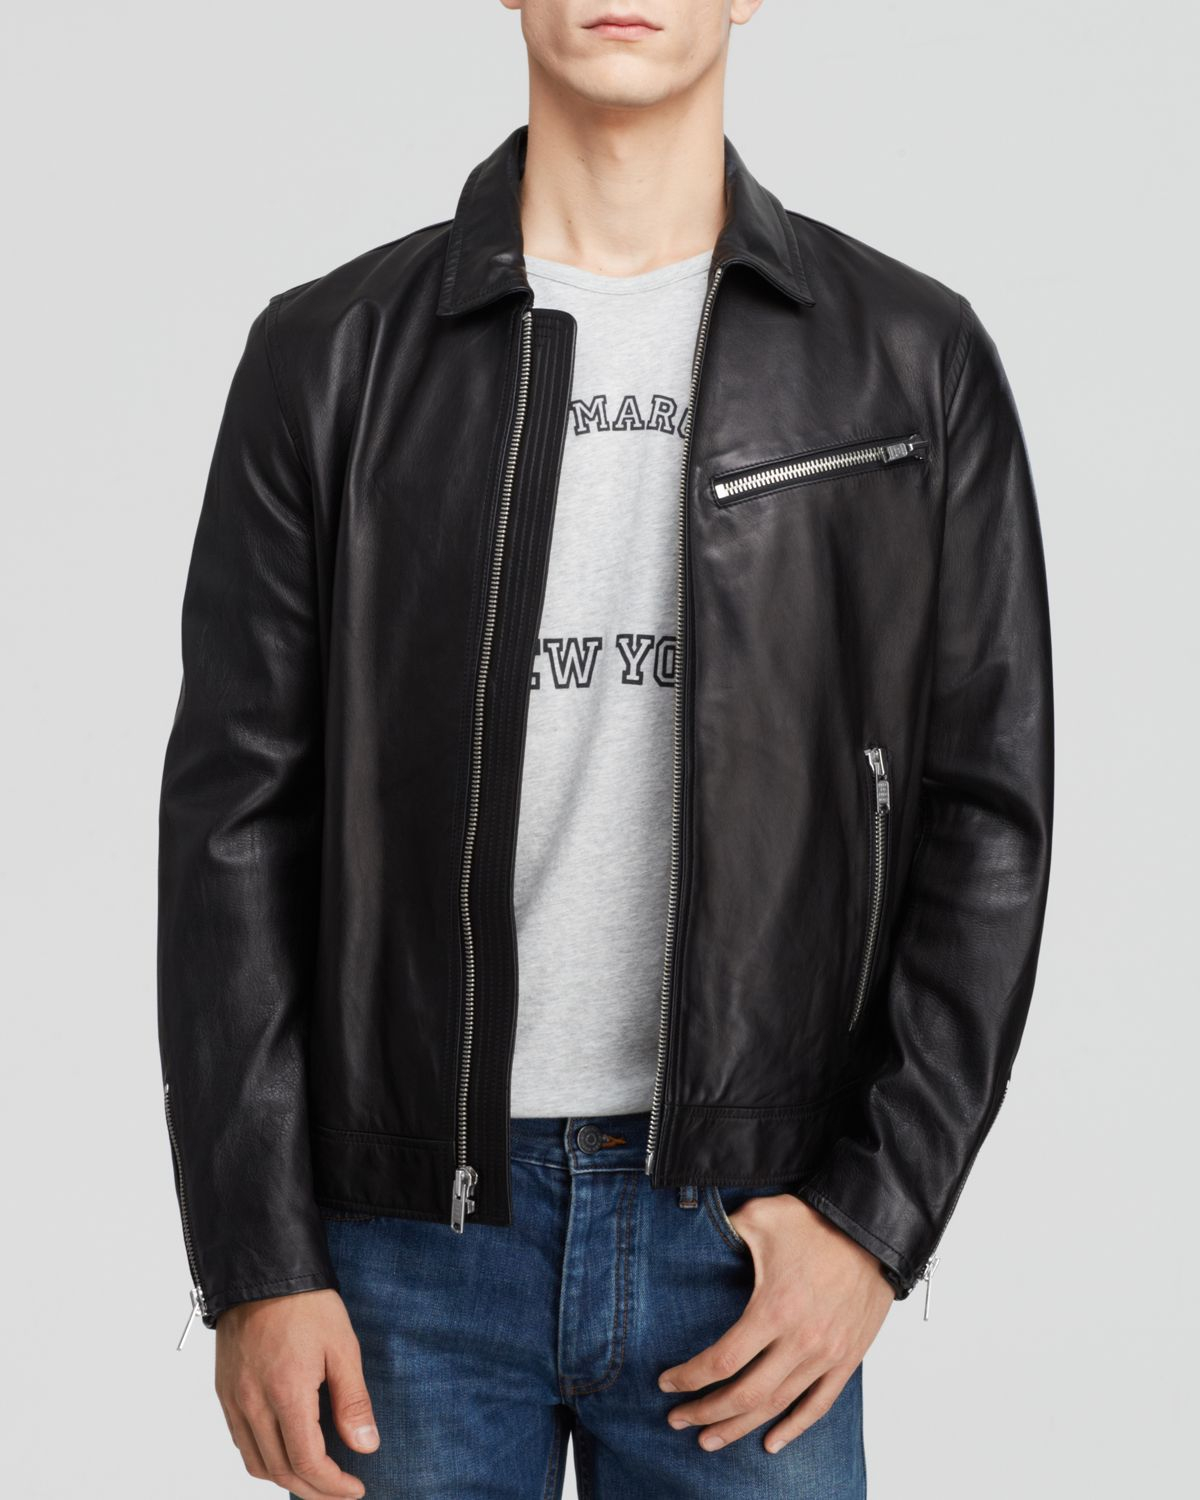 Marc By Marc Jacobs Brennan Leather Jacket in Black for Men - Lyst